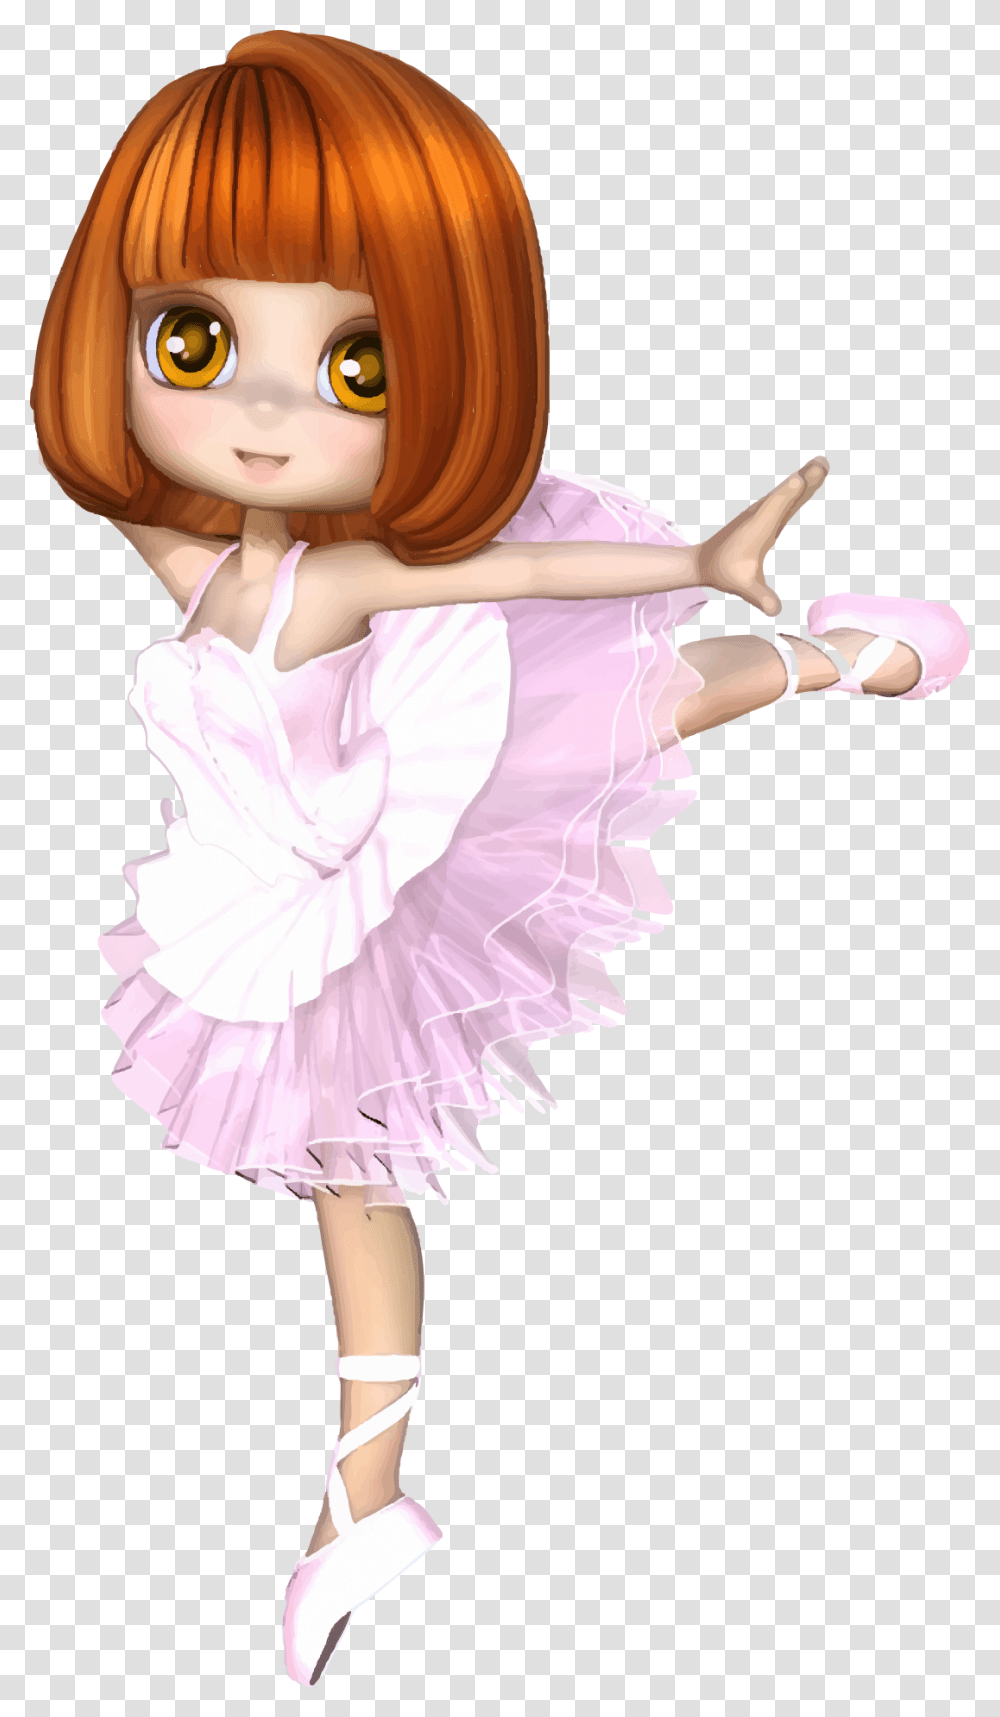 Dancing Anime Girl Image Cartoon Girl Dancing, Doll, Toy, Dance, Person Transparent Png